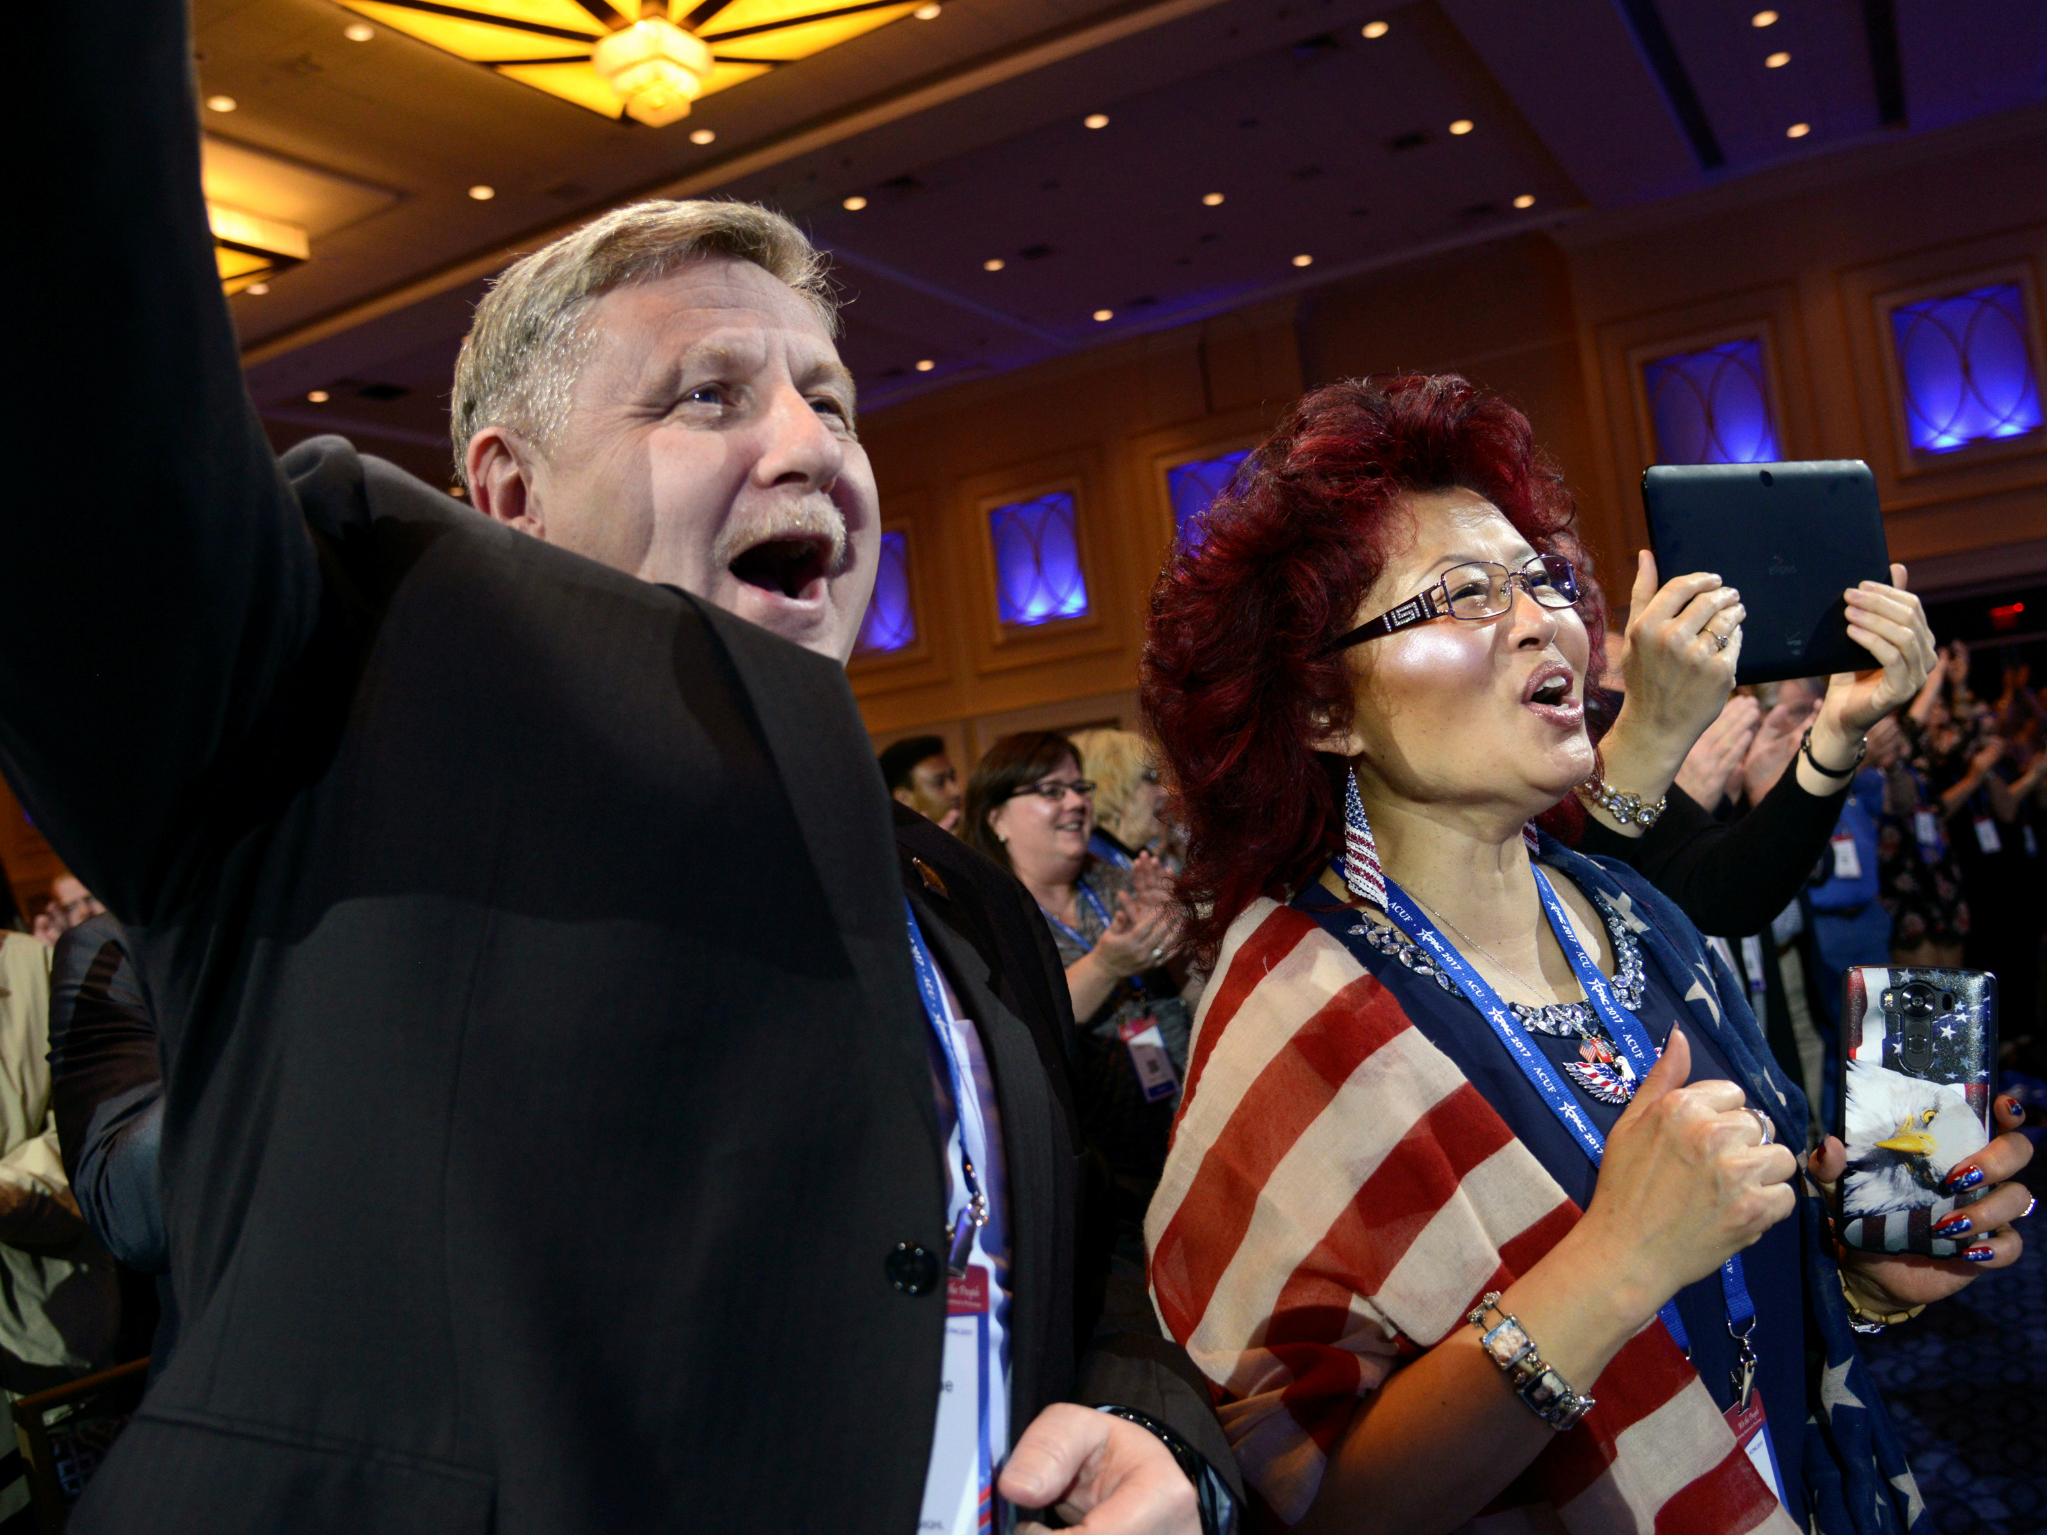 Pennsylvania Congressman Rick Saccone and his wife Yong cheer as they listen to remarks during the Conservative Political Action Conference (CPAC), 22 February 2017.